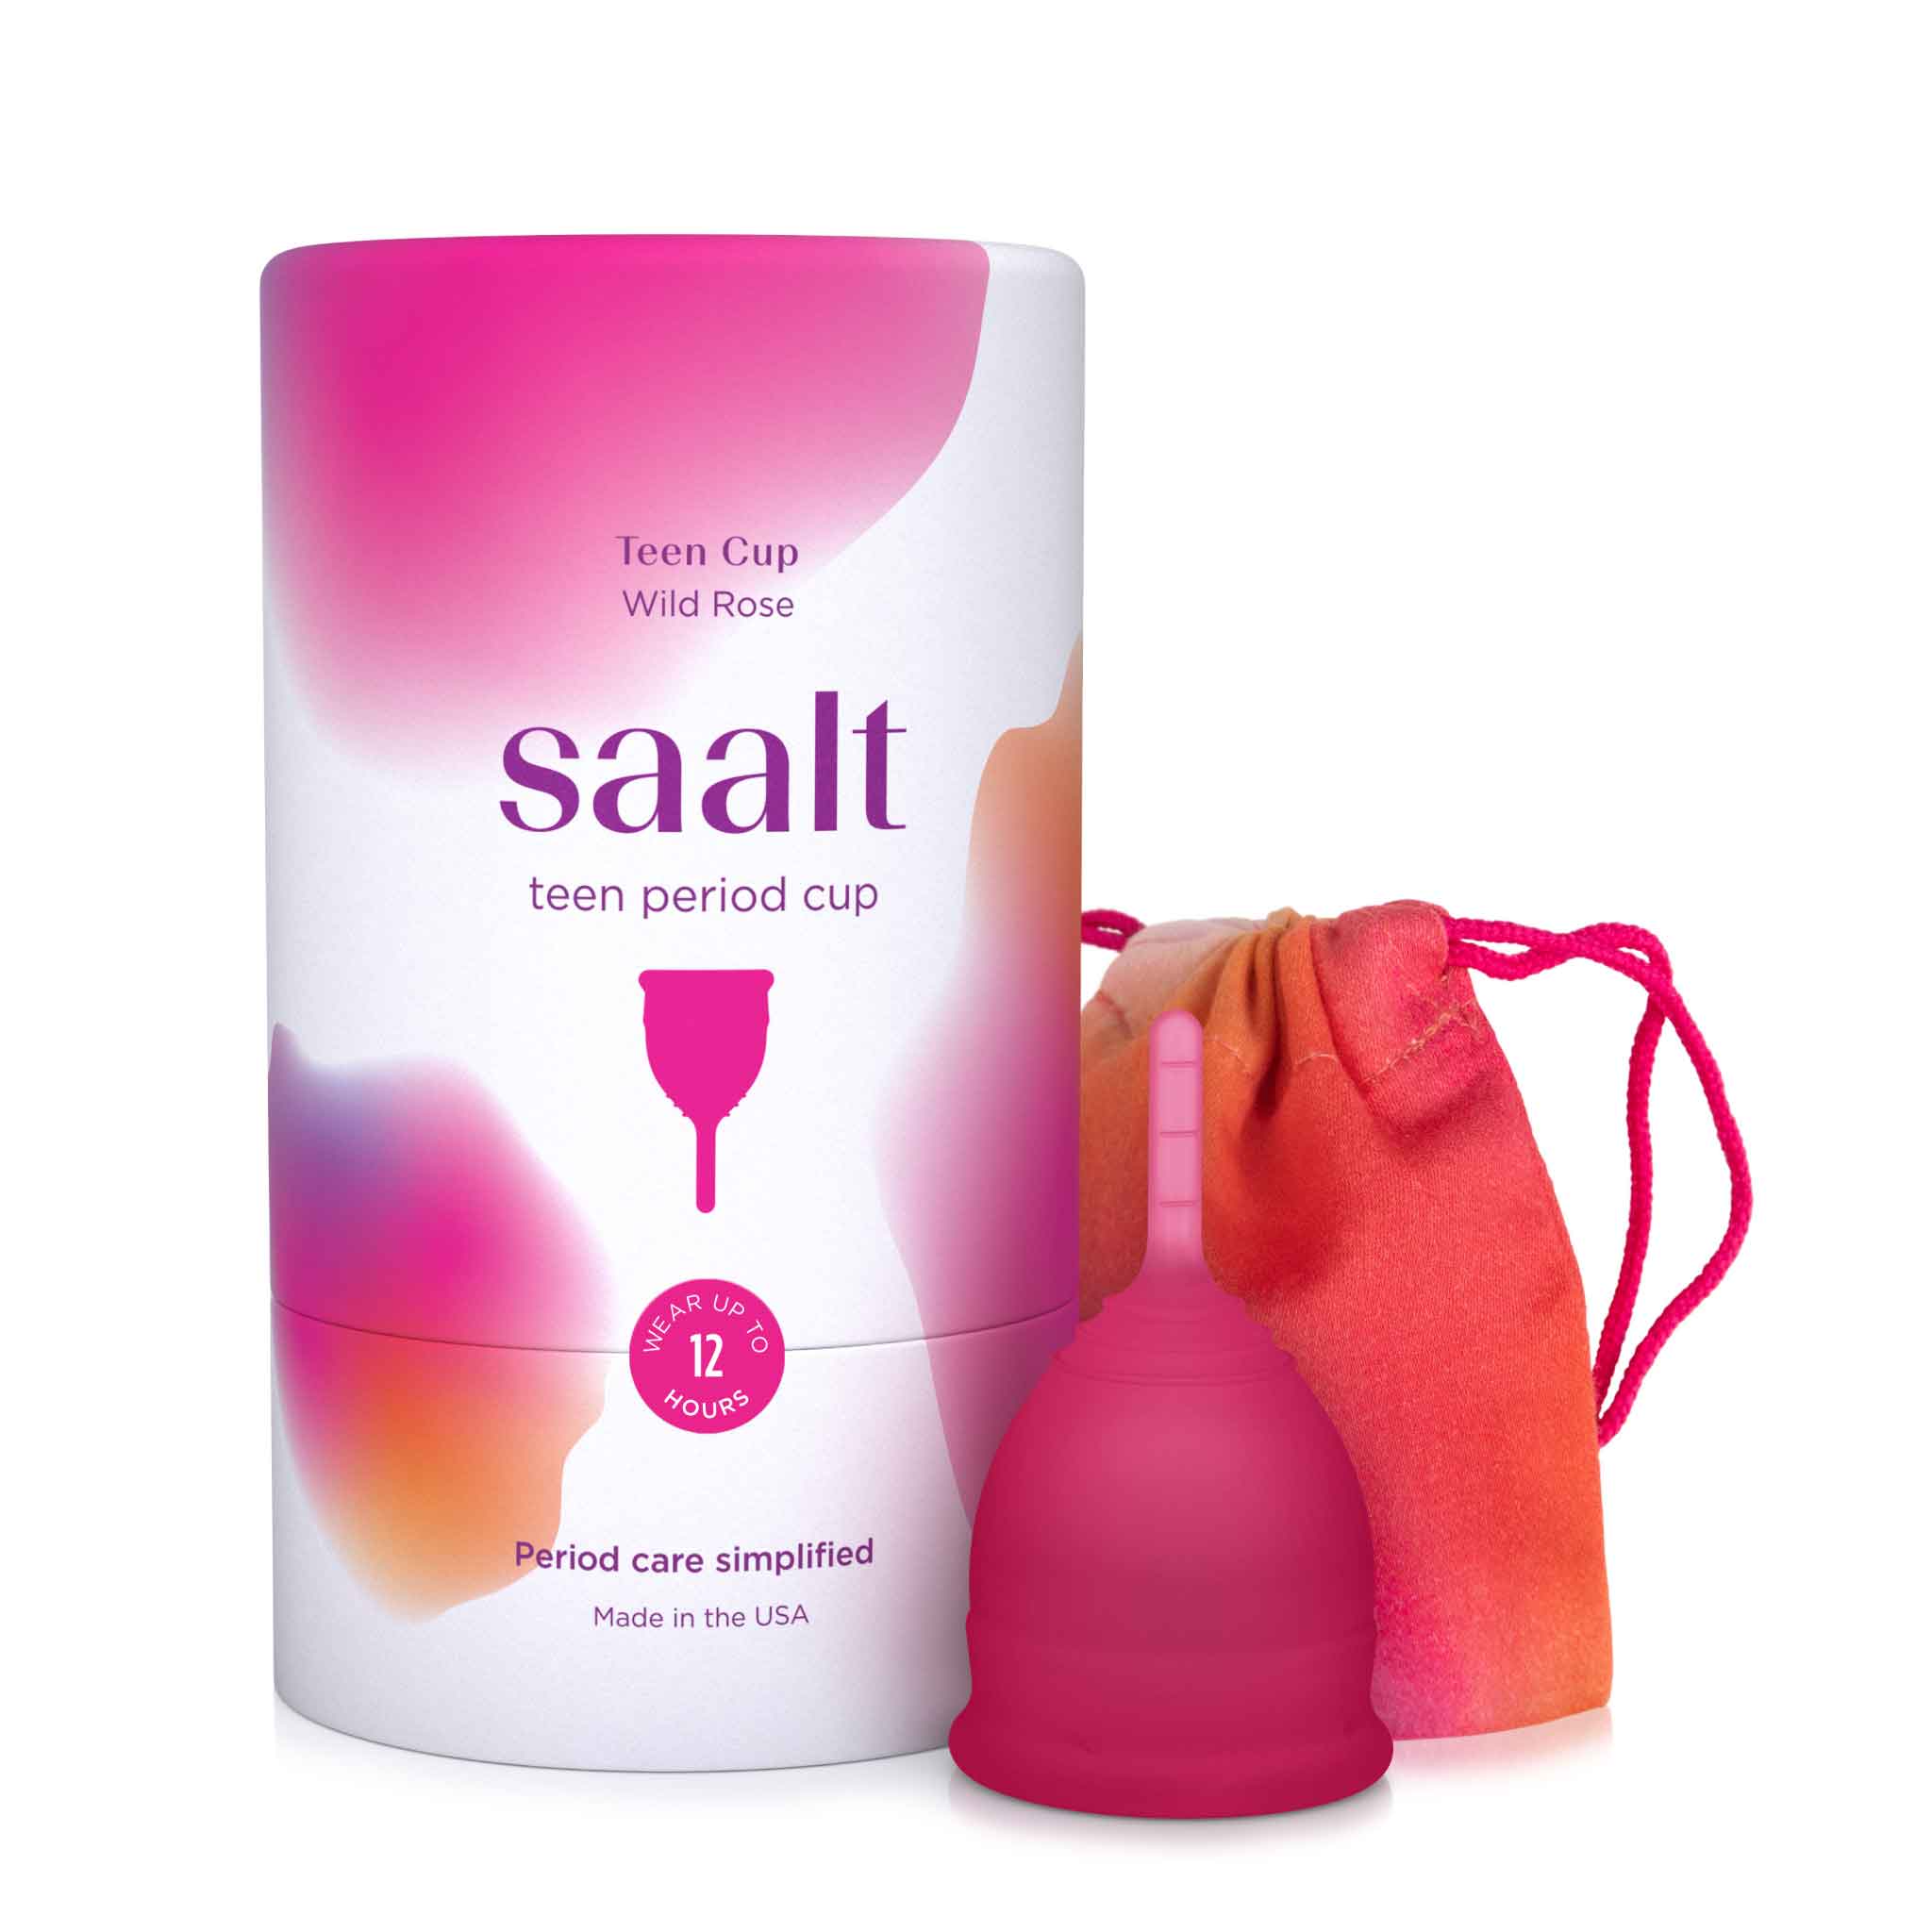 Menstrual cup for teens.